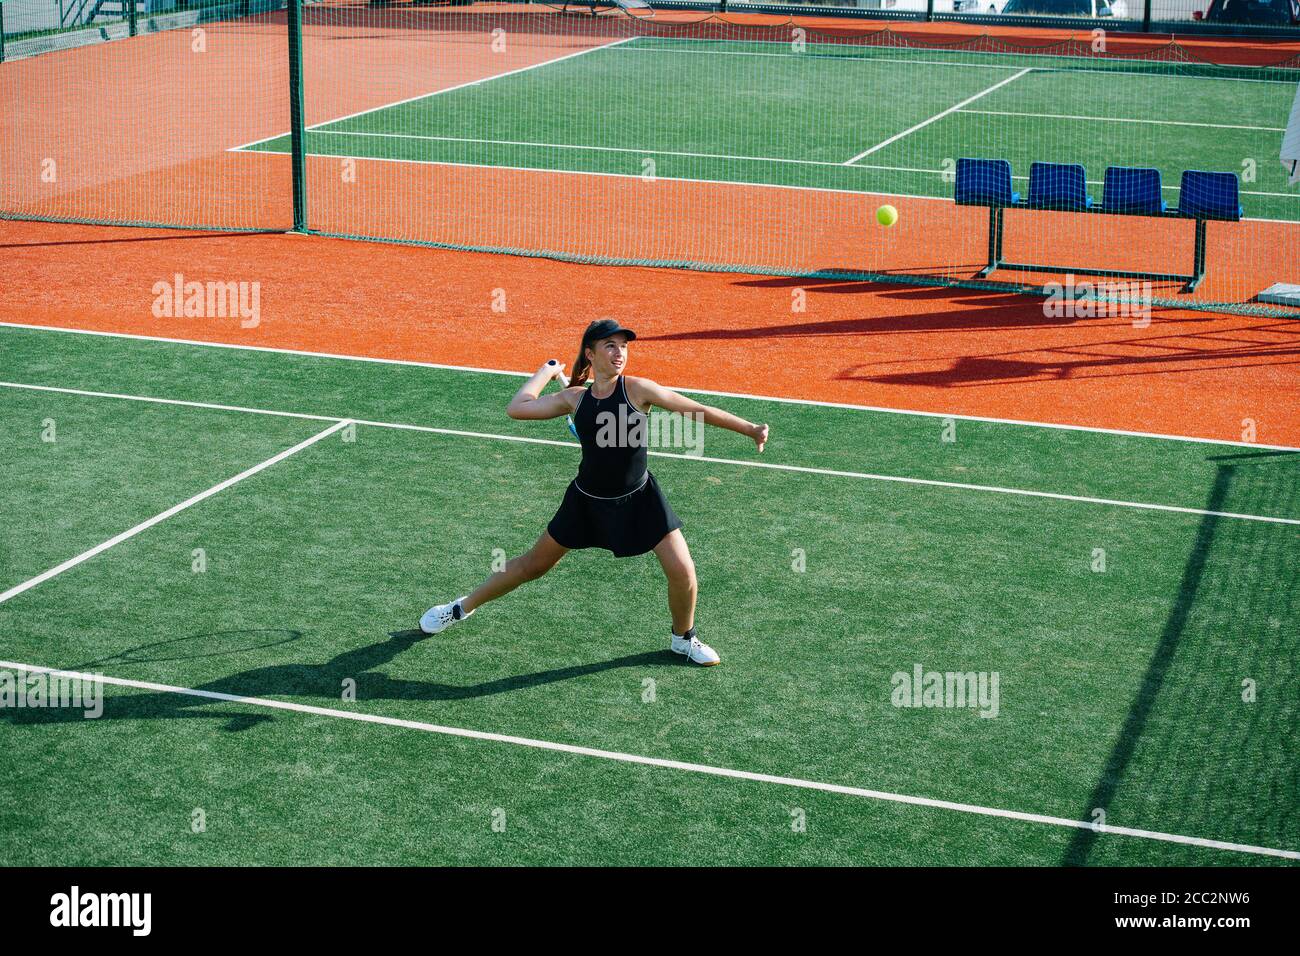 Strong athletic girl playing tennis on a court, ready to return overhead ball Stock Photo